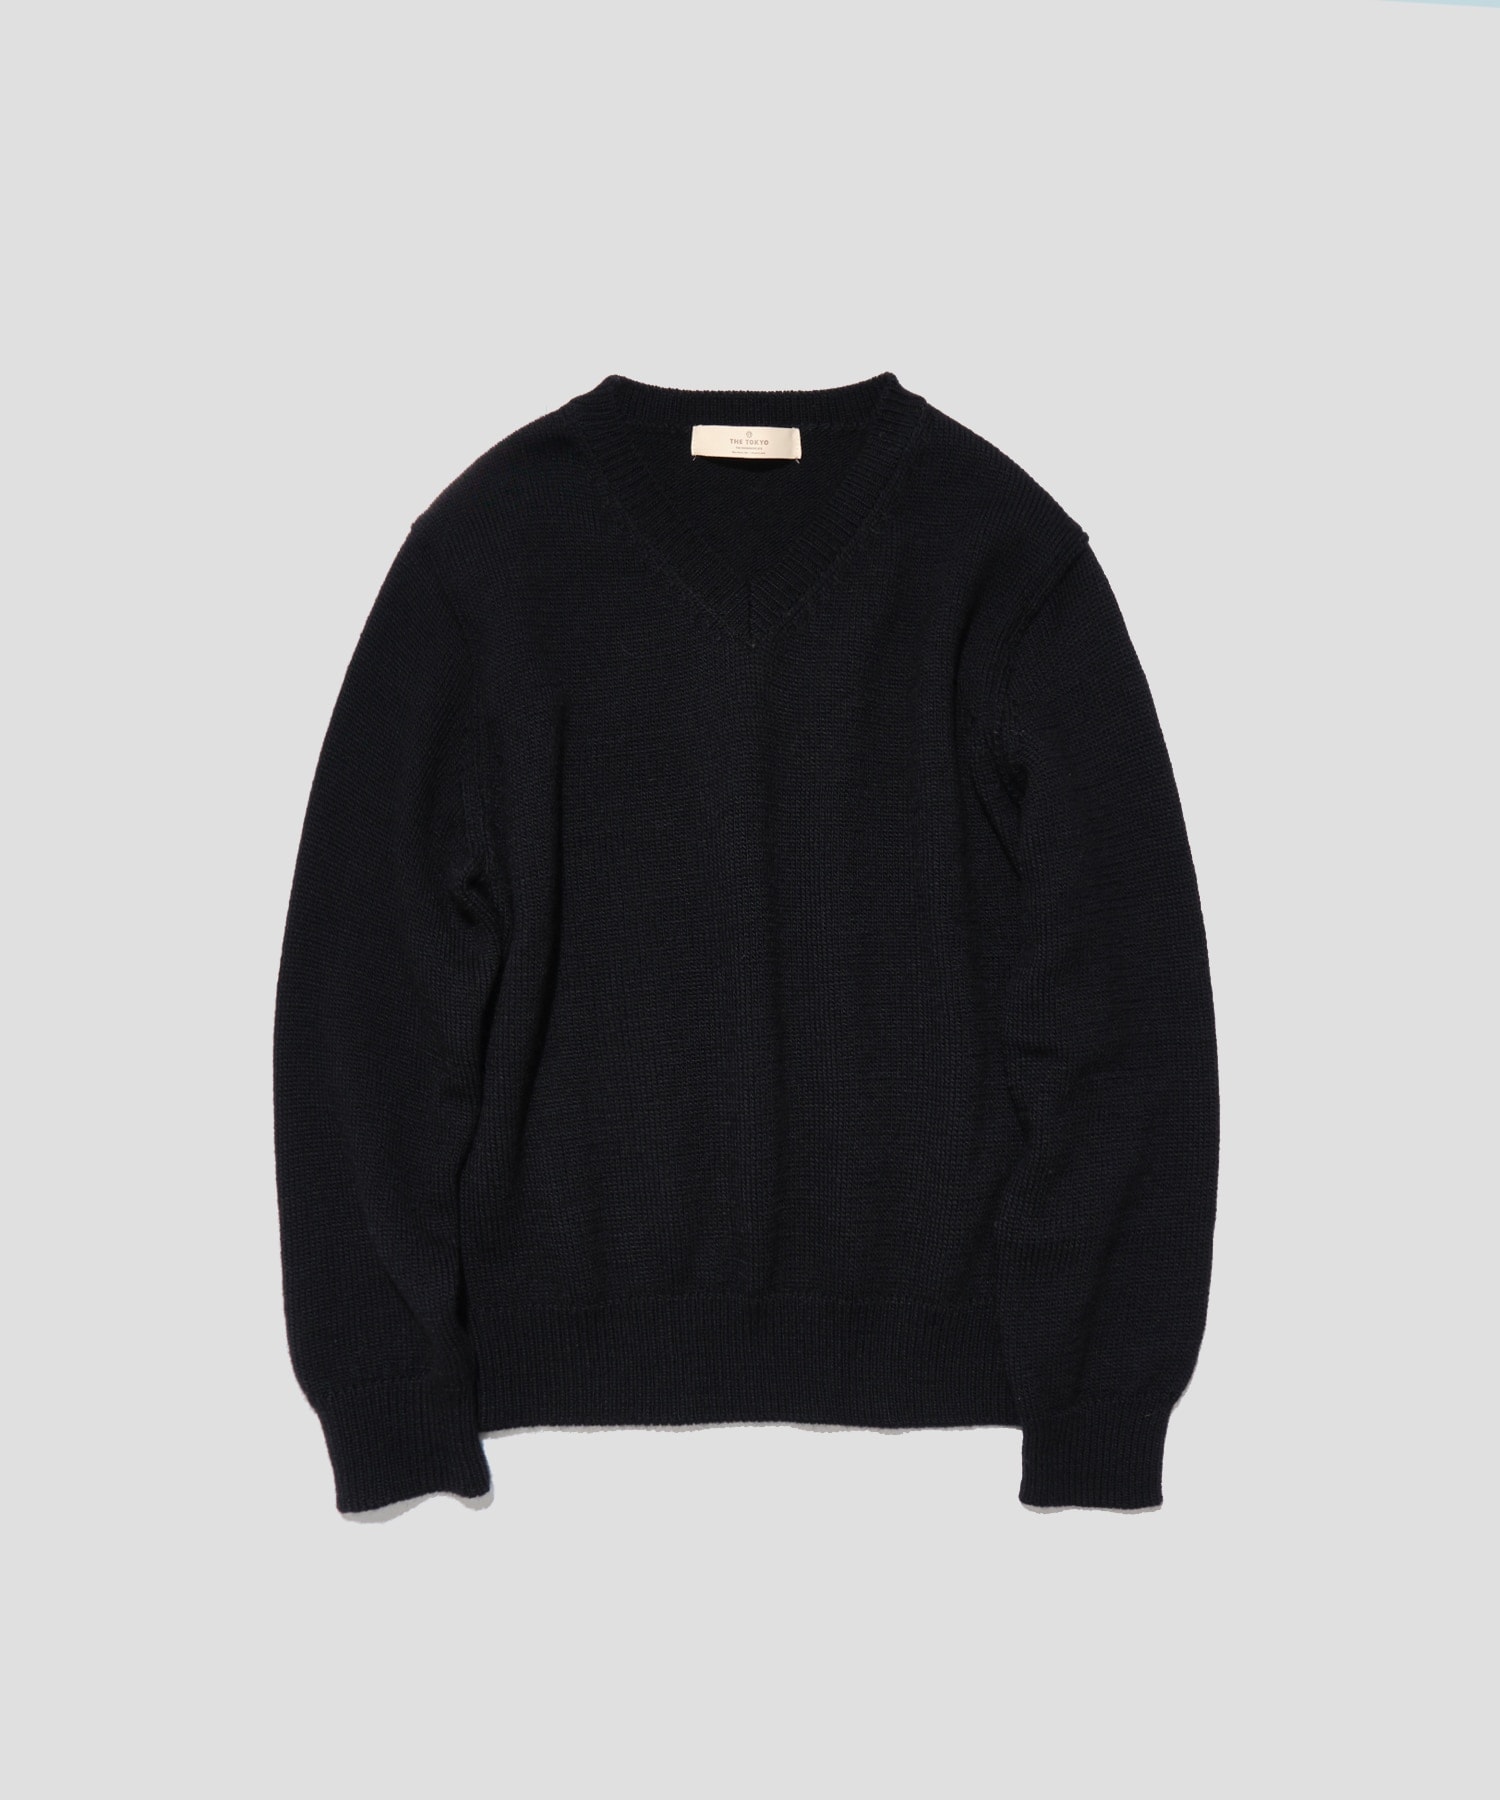 The Standerd V/N Sweater